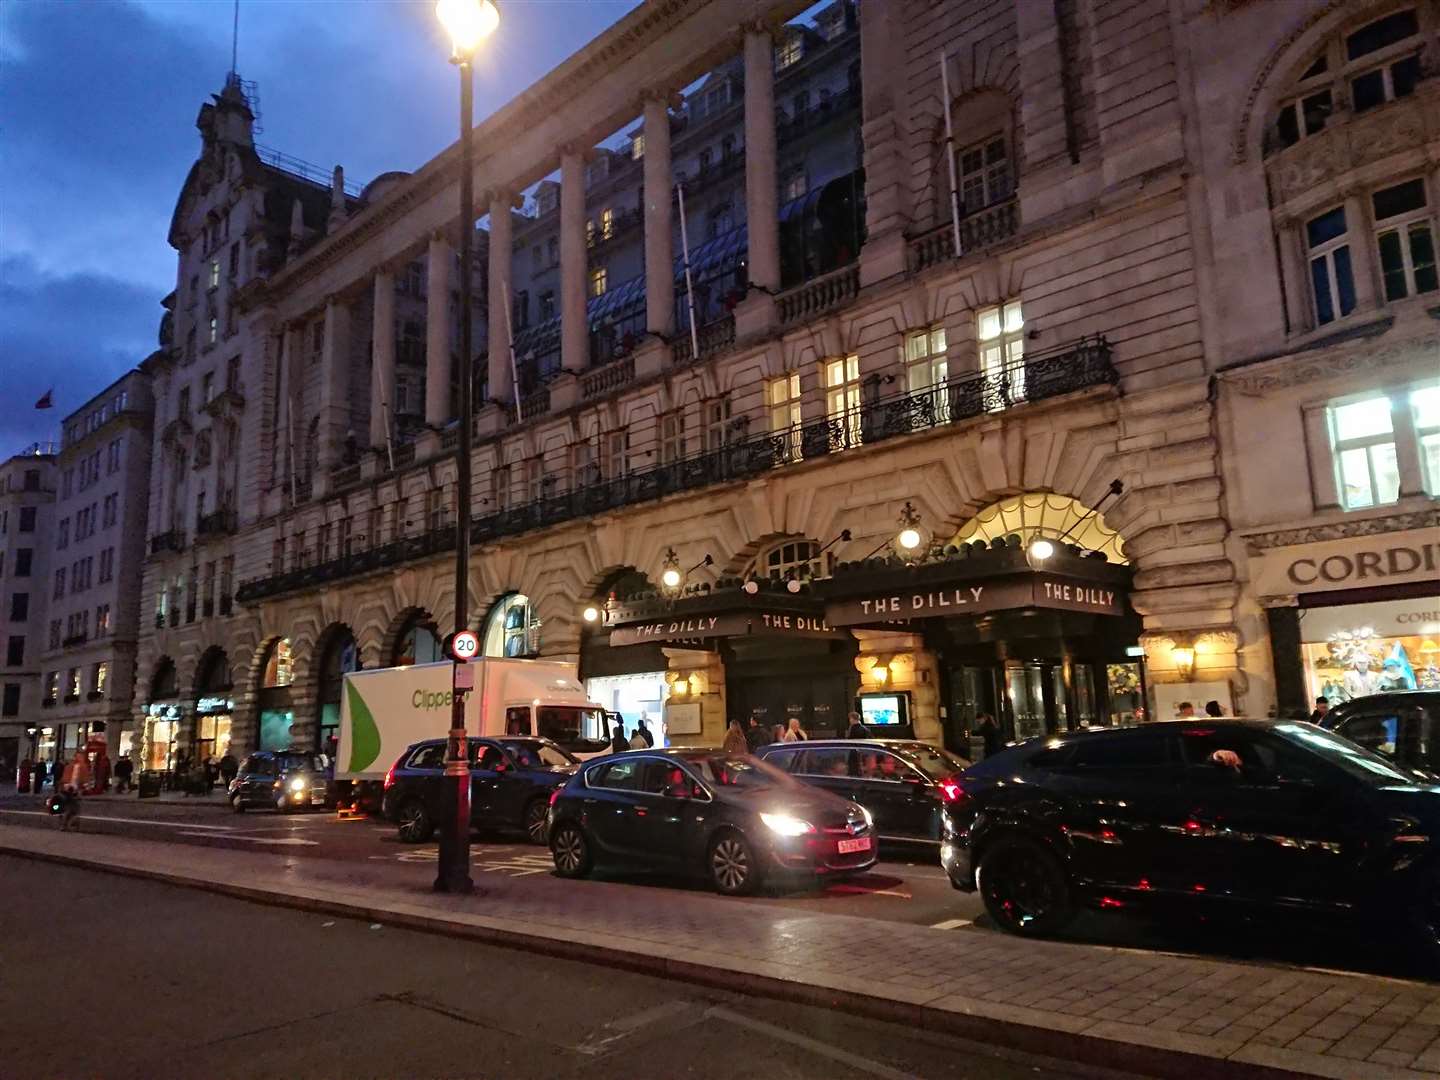 The Dilly hotel in Picadilly